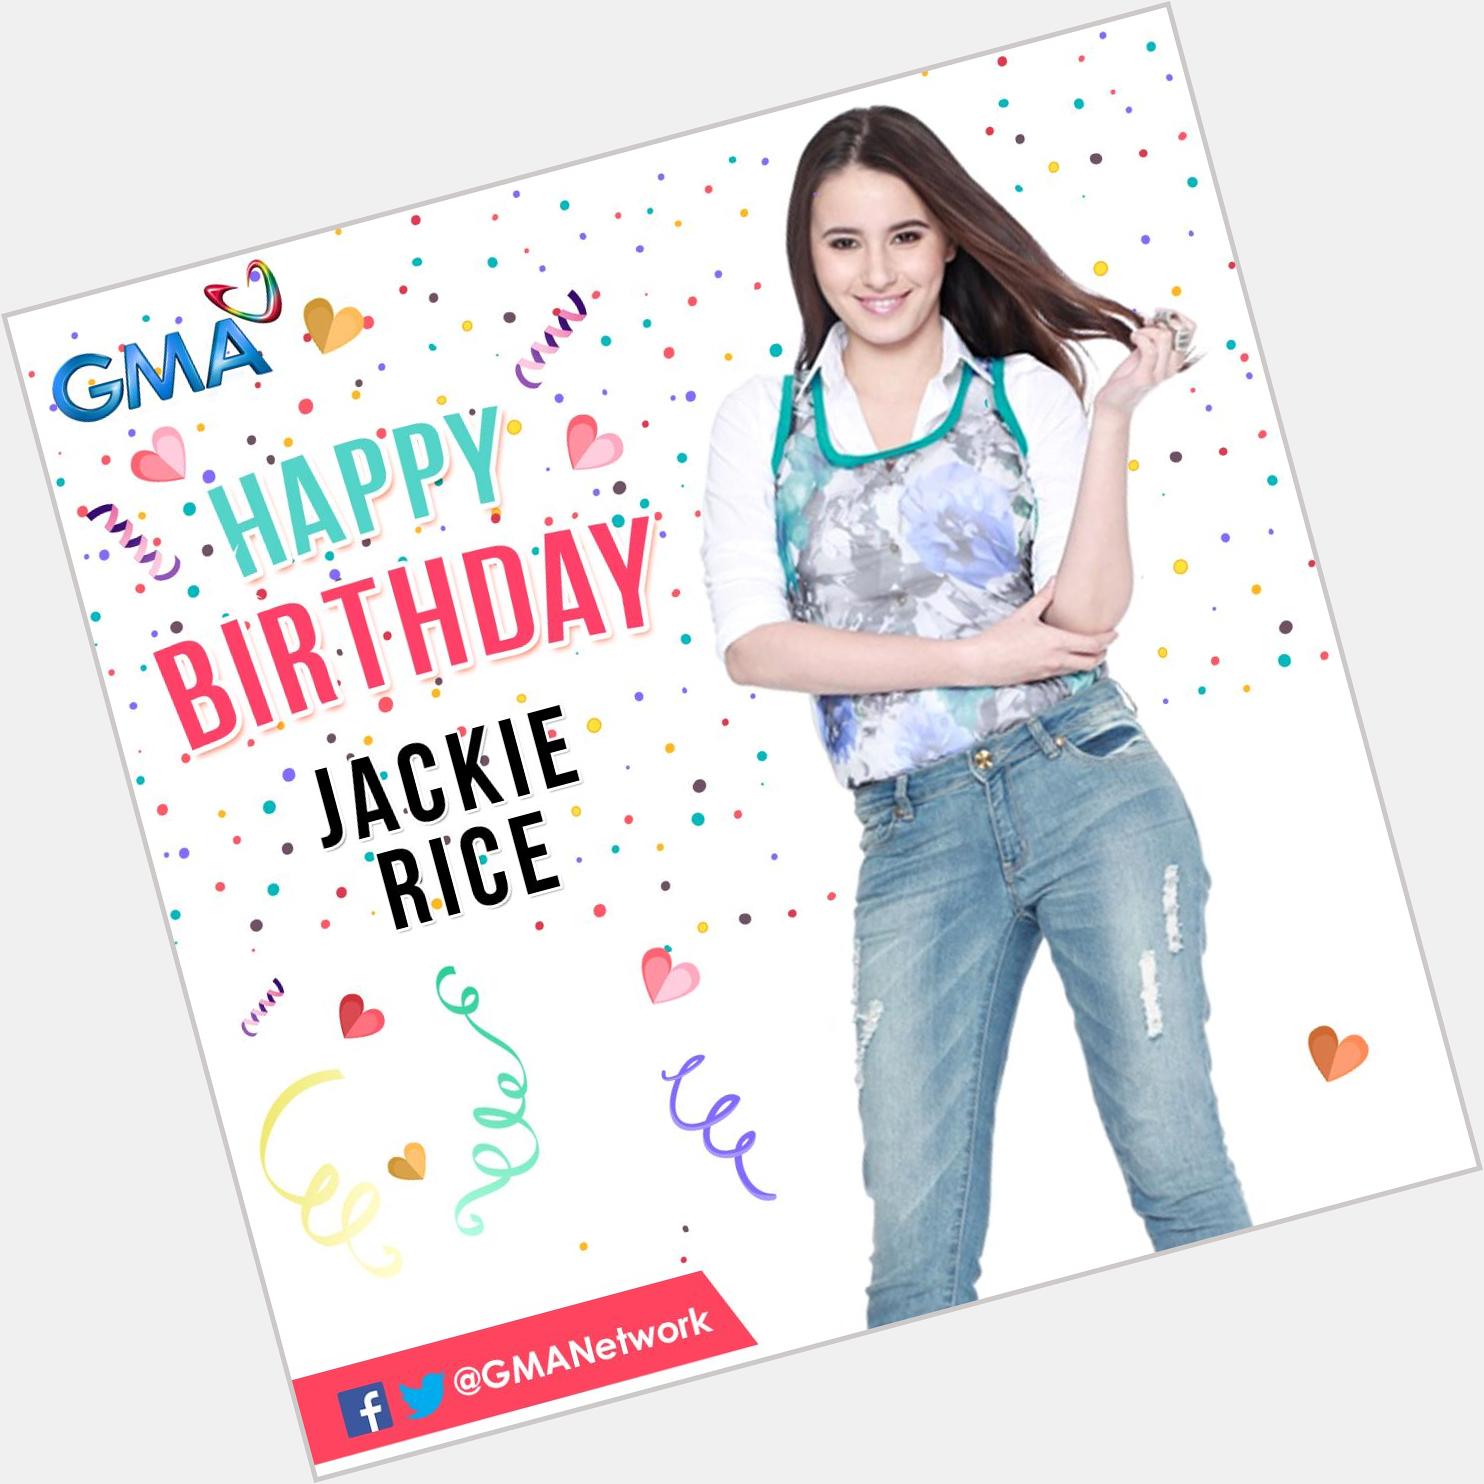 Happy Birthday to the beautiful and talented Jackie Rice! May all your wishes come true on your very special day. 